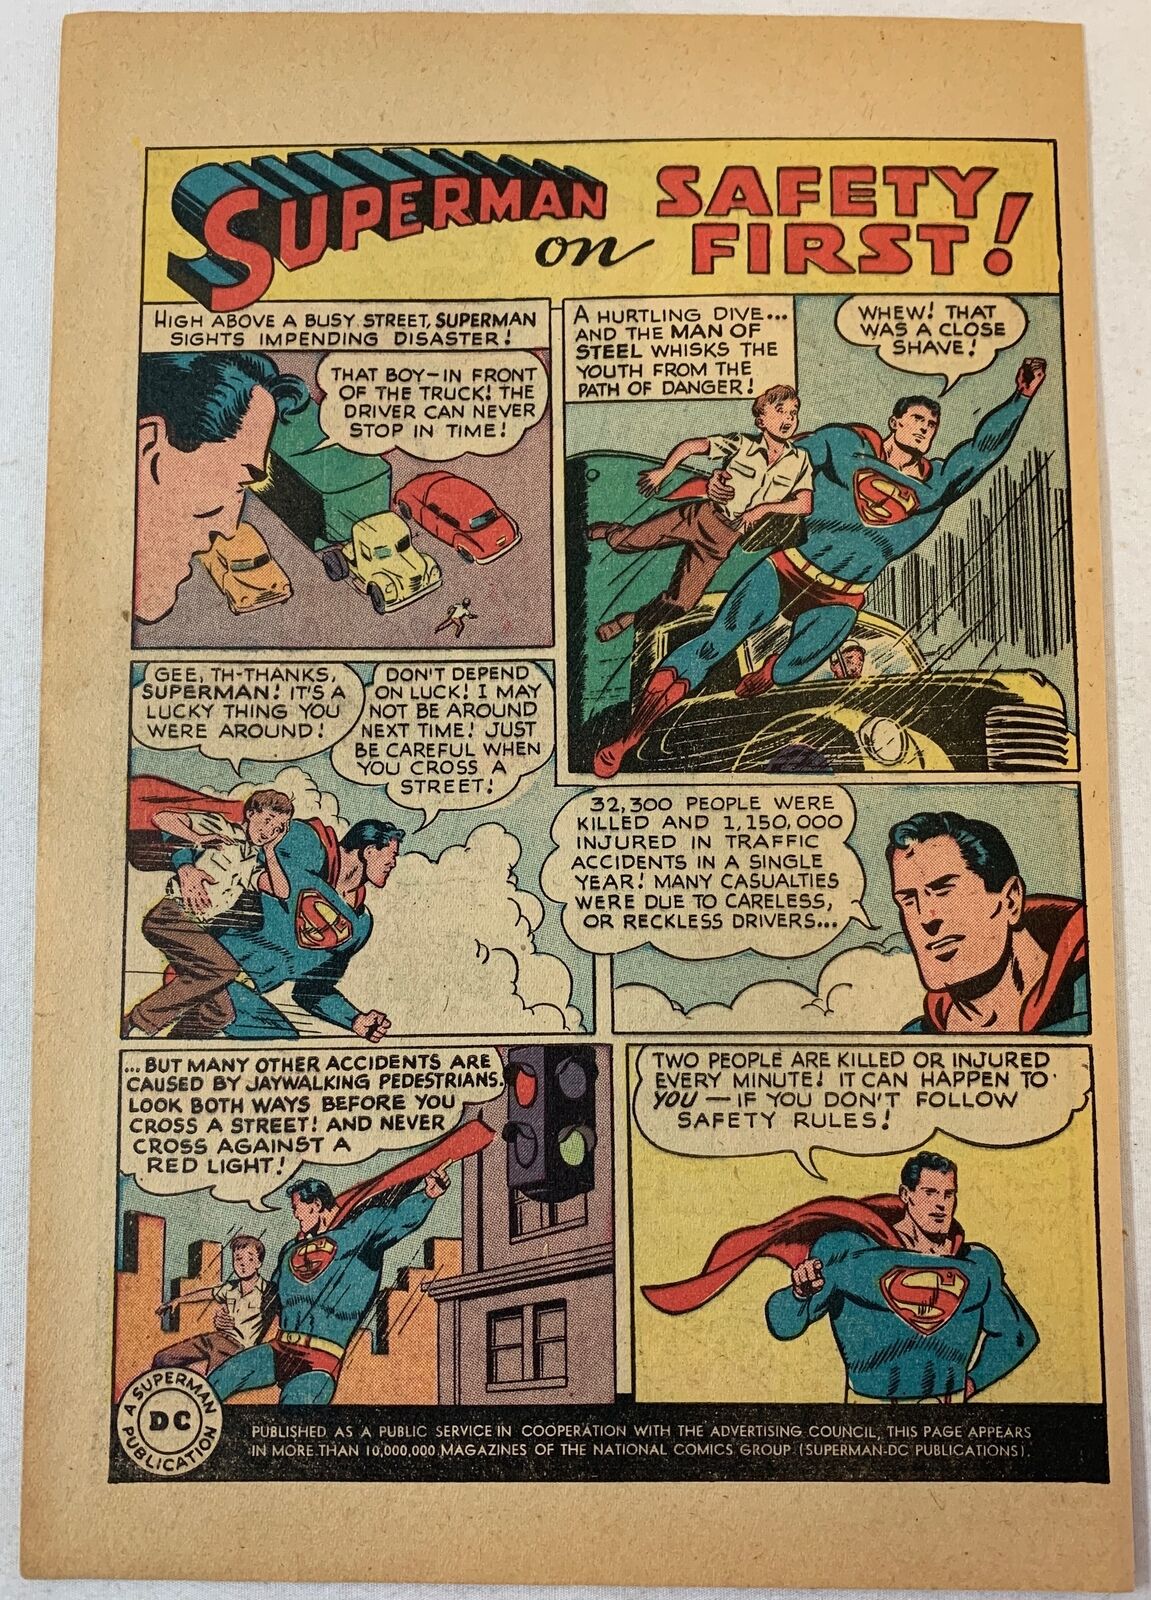 1949 PSA ad page ~ SUPERMAN ON SAFETY FIRST